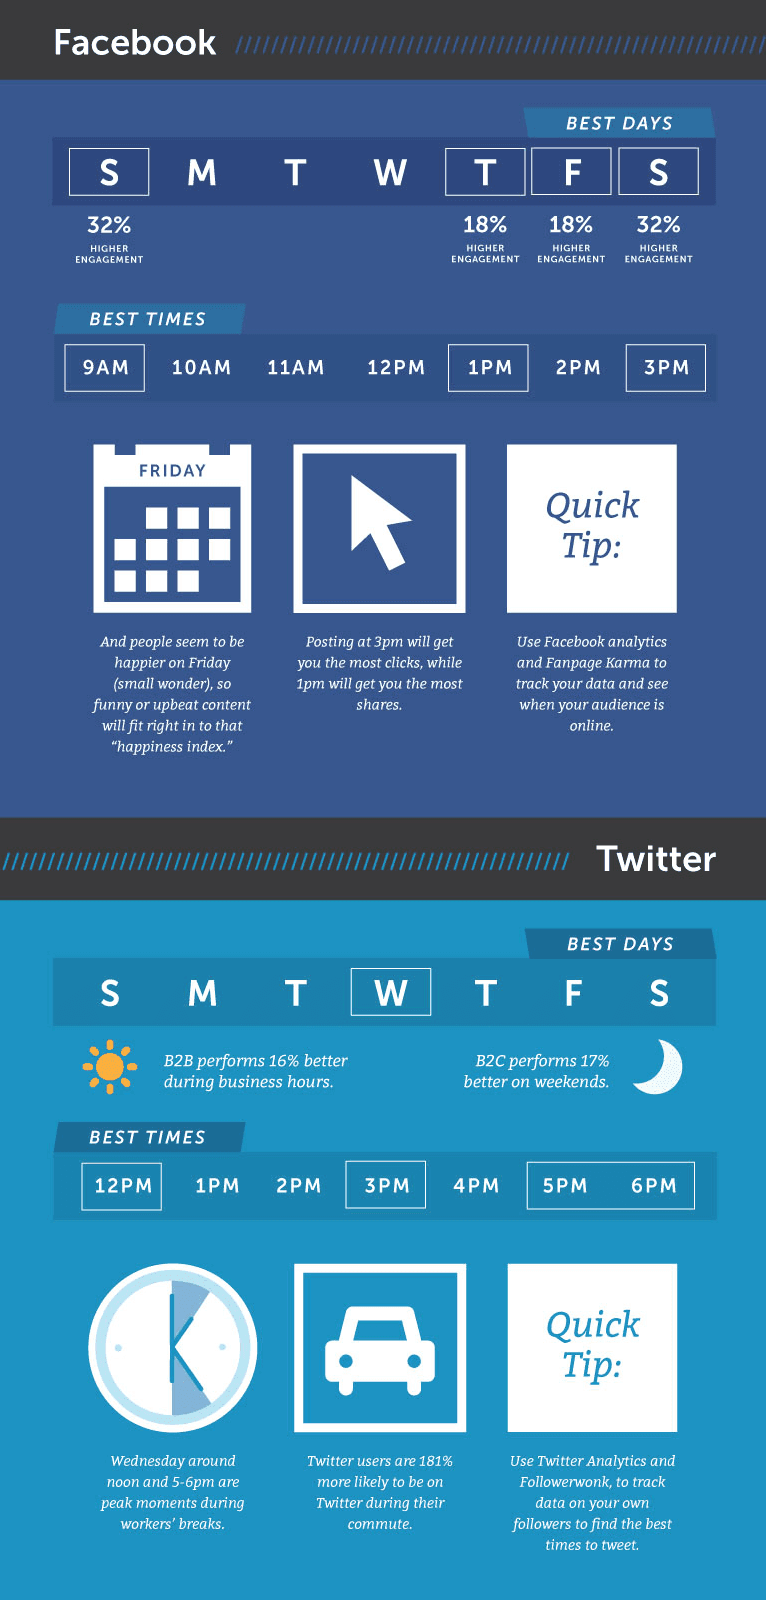 Example of an infographic from CoSchedule